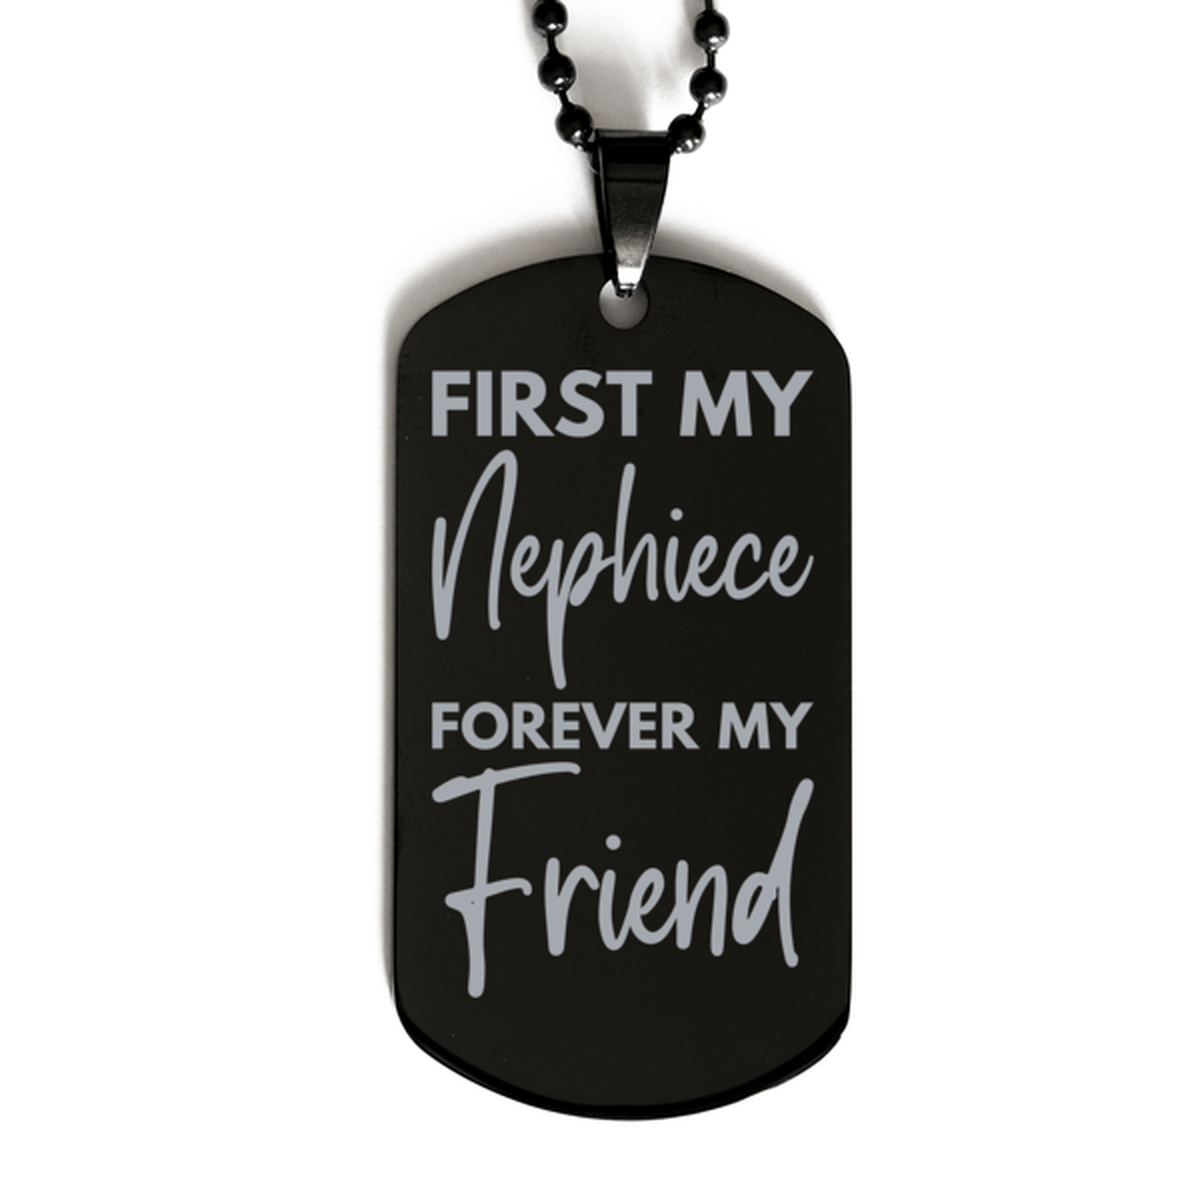 Inspirational Nephiece Black Dog Tag Necklace, First My Nephiece Forever My Friend, Best Birthday Gifts for Nephiece